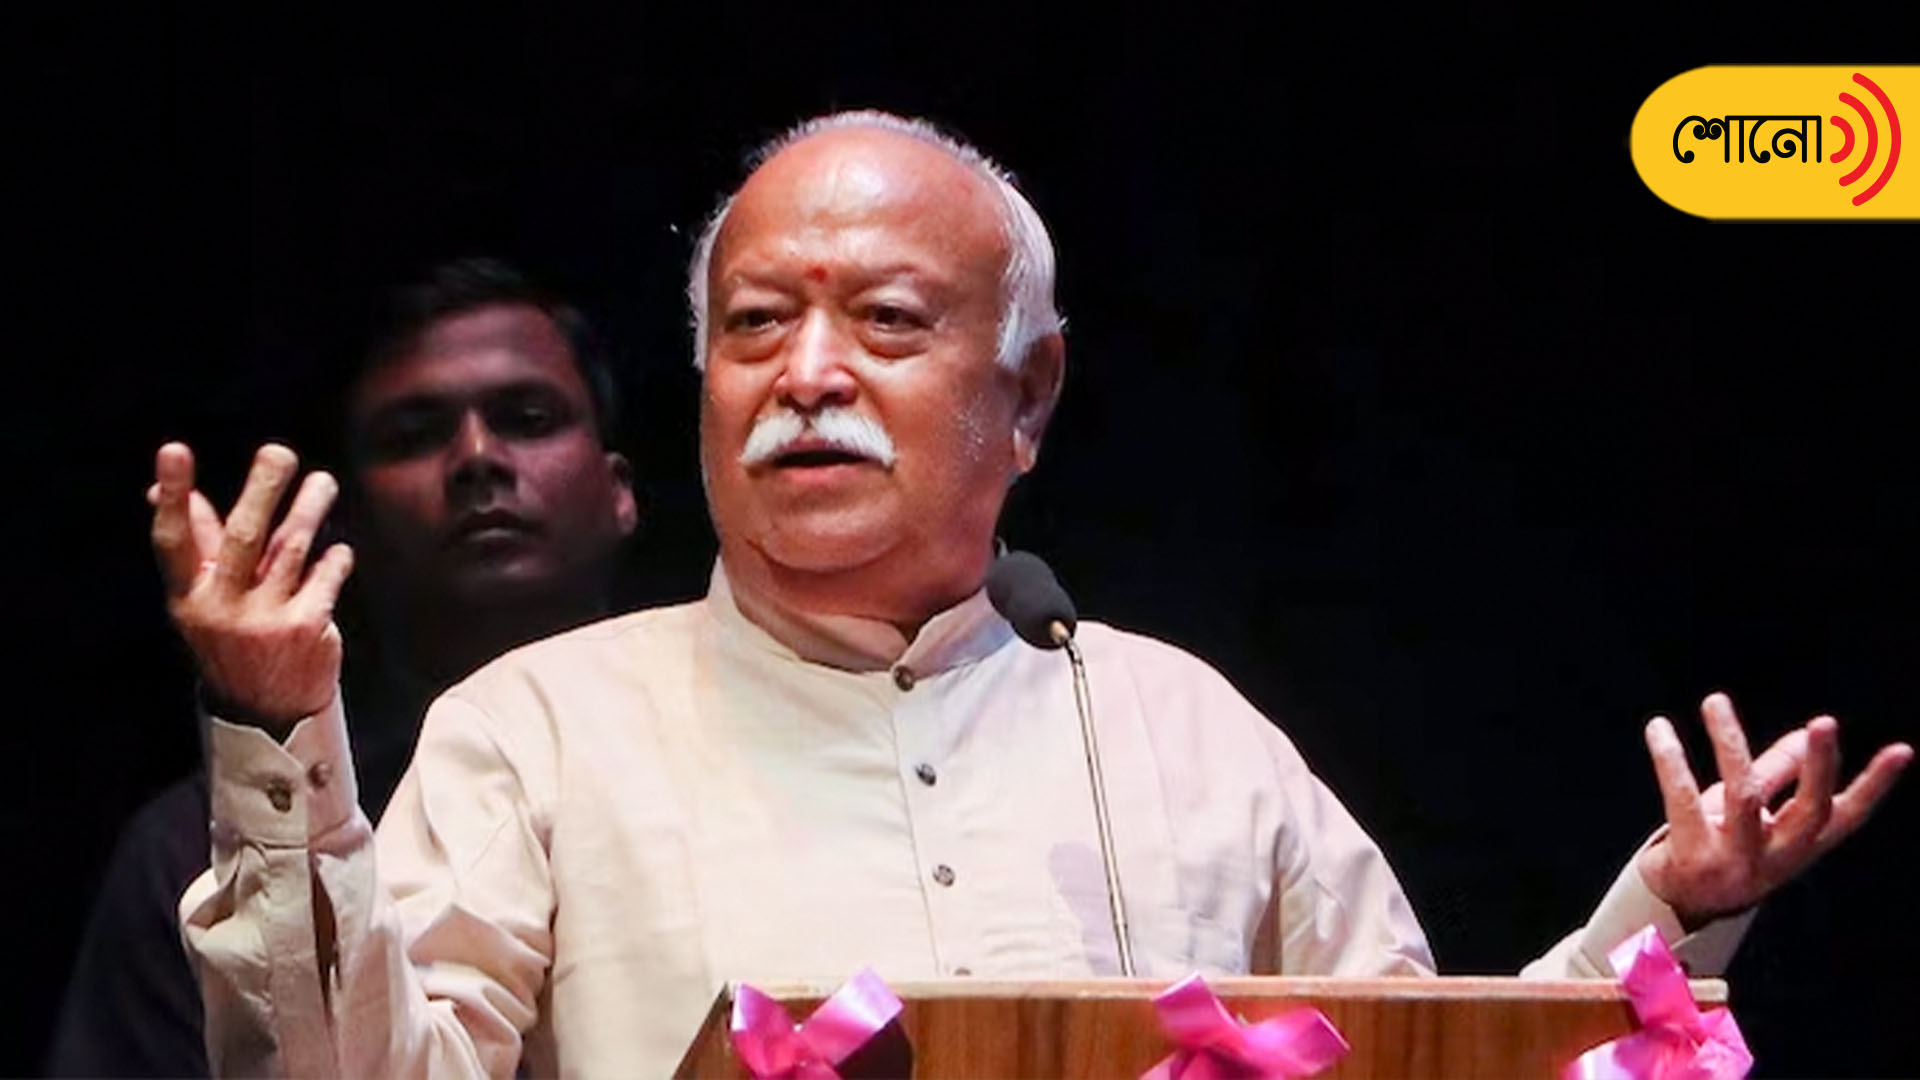 akhand-bharat-will-become-reality-says-rss-chief-mohan-bhagwat